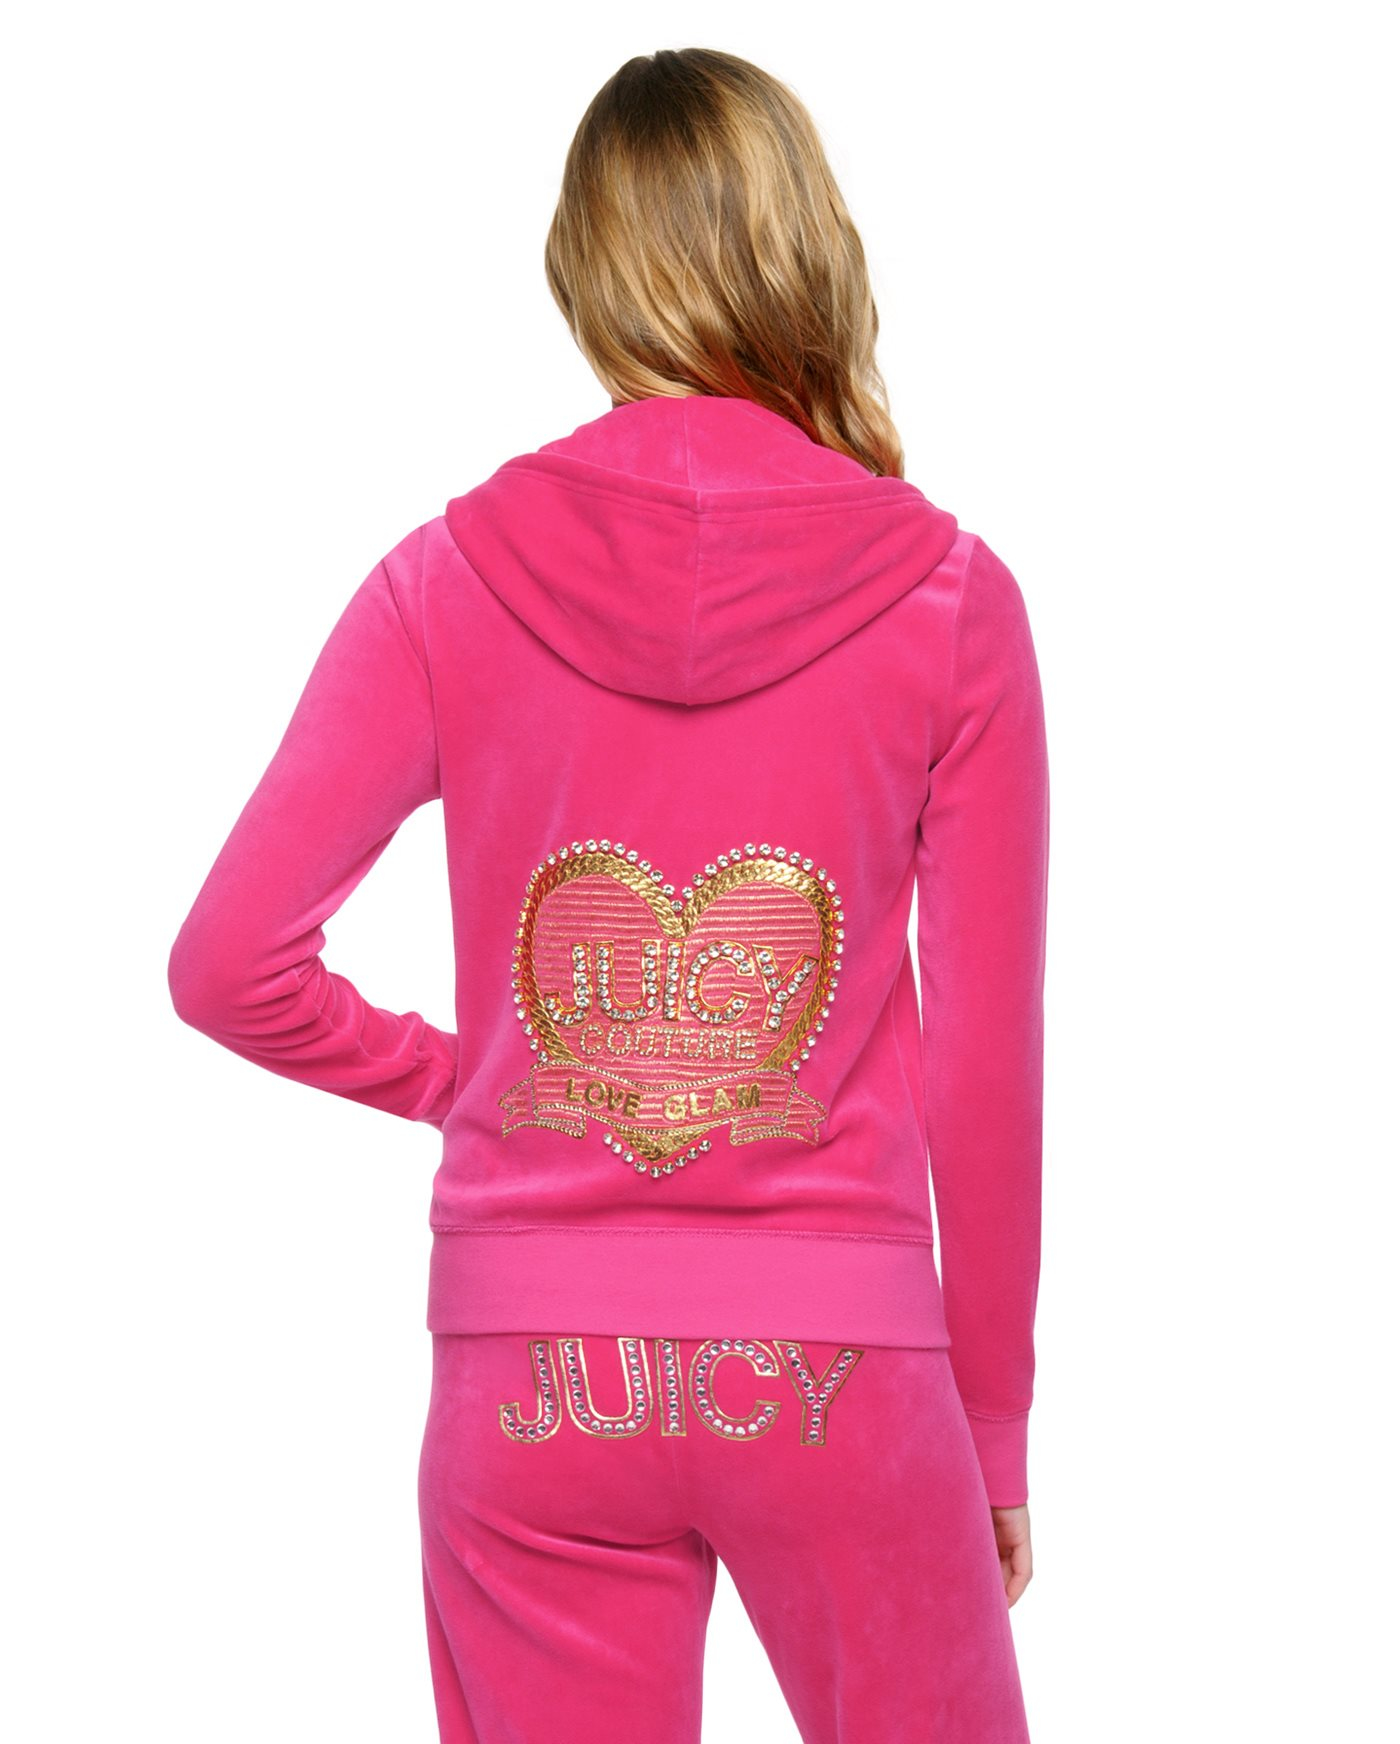 Juicy couture Logo Velour Love & Glam Original Jacket in Pink | Lyst